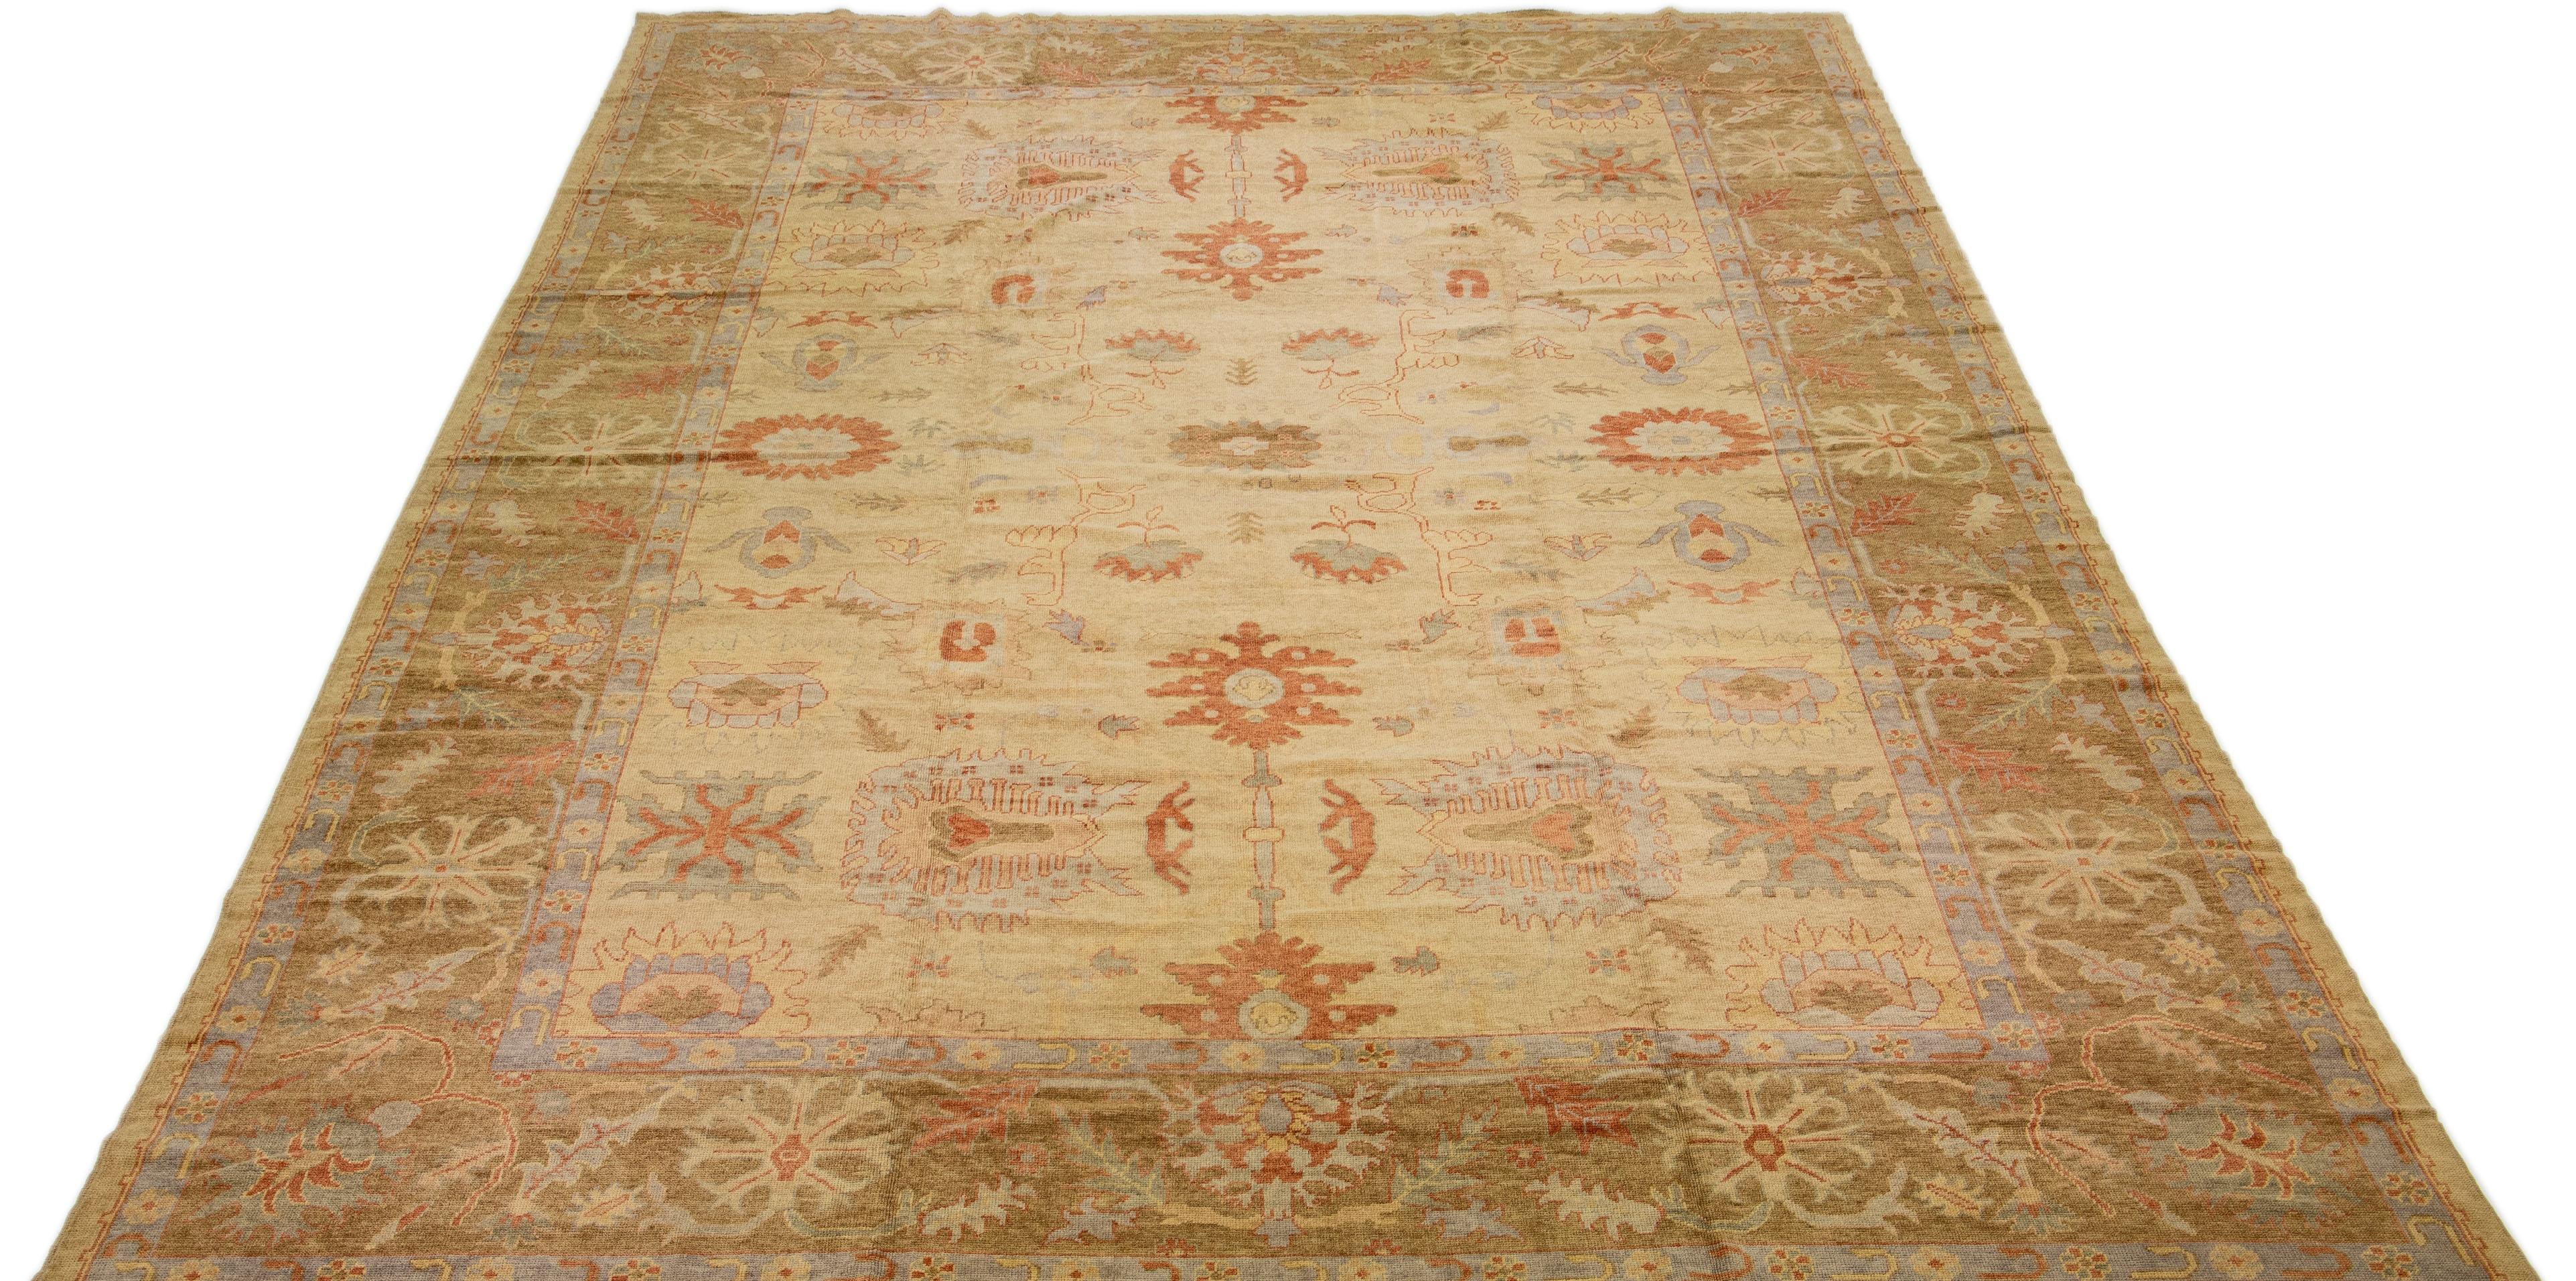 Beautiful modern Turkish Oushak hand-knotted wool rug with a beige color field. This rug has brown, yellow, and rust accents in a gorgeous large-scale floral motif

This rug measures: 14'5